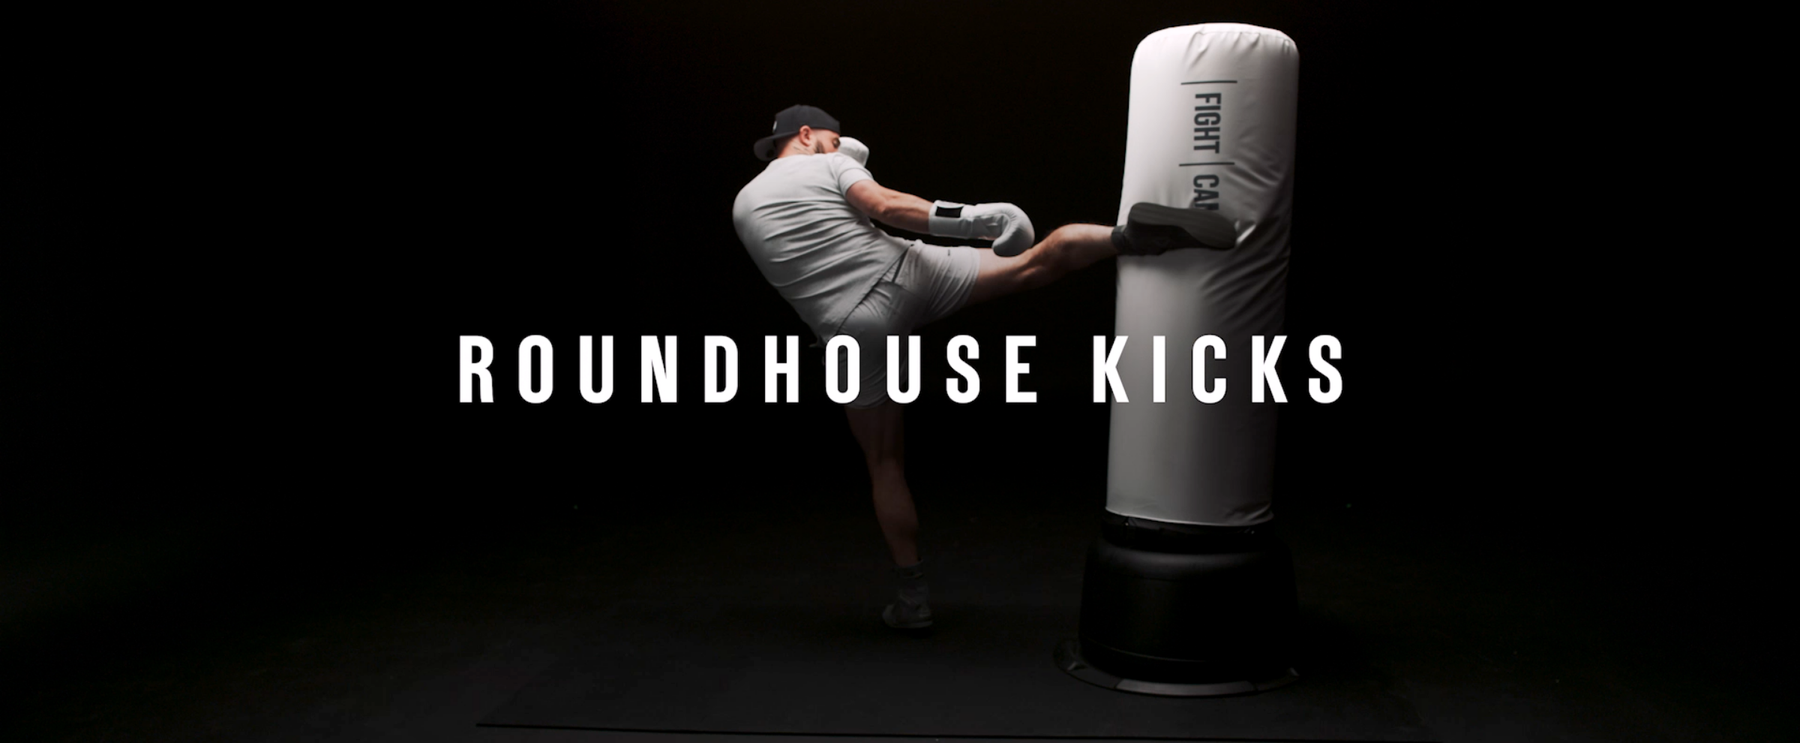 Roundhouse Kick Step By Step Guide | Beginner Kickboxing